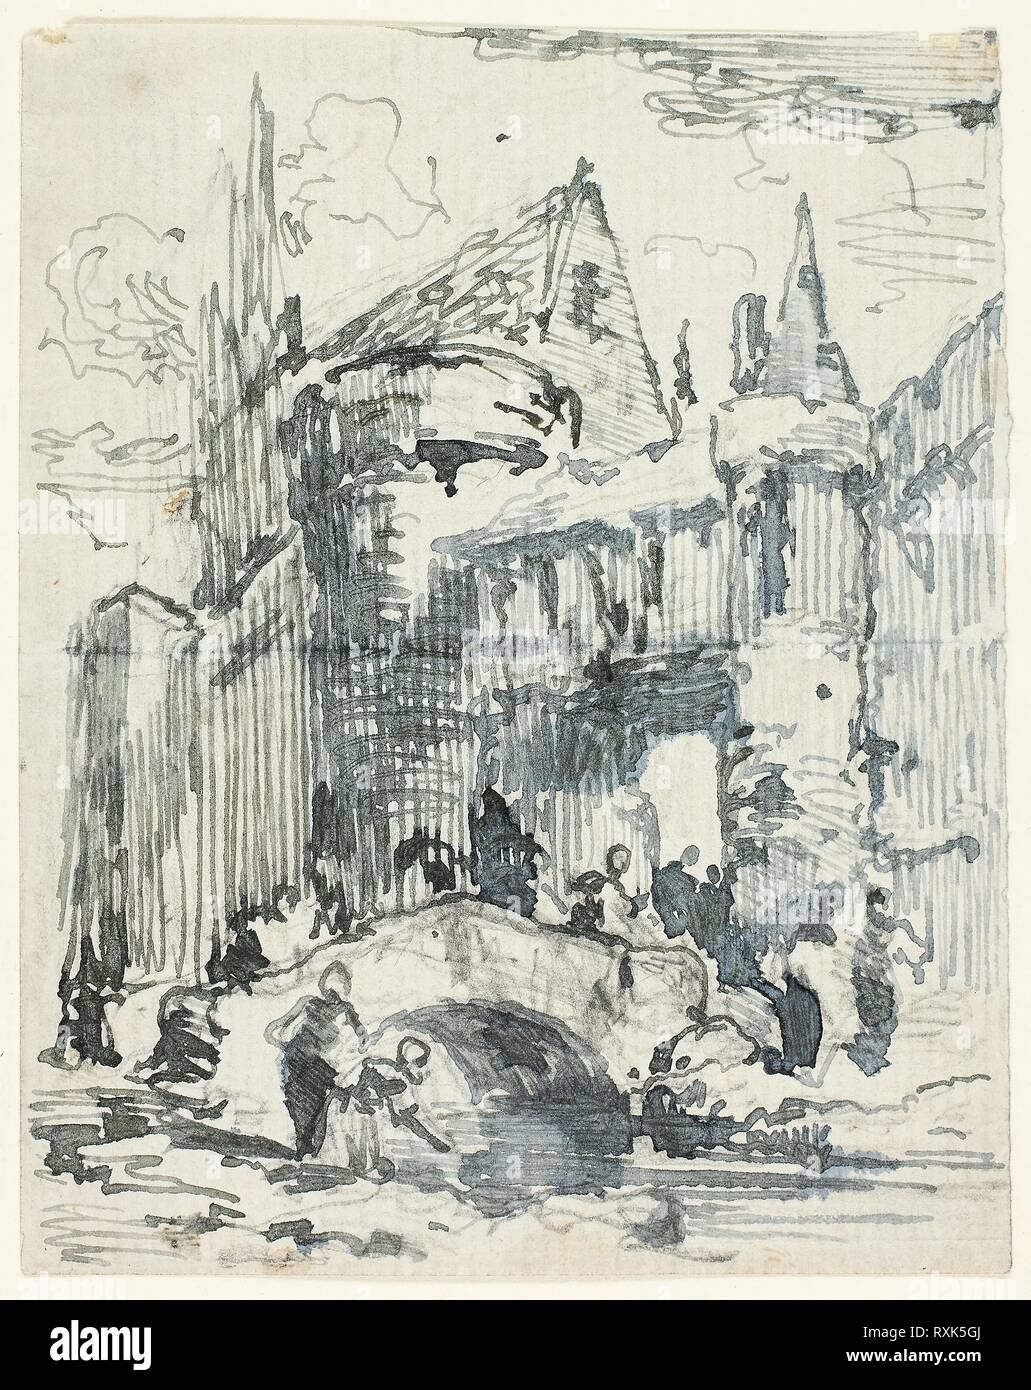 Town Bridge and Portal. Possibly William Leighton Leitch; Scottish, 1804-1883. Date: 1820-1839. Dimensions: 134 x 106 mm. Pen and gray ink over graphite on gray laid paper. Origin: Scotland. Museum: The Chicago Art Institute. Stock Photo